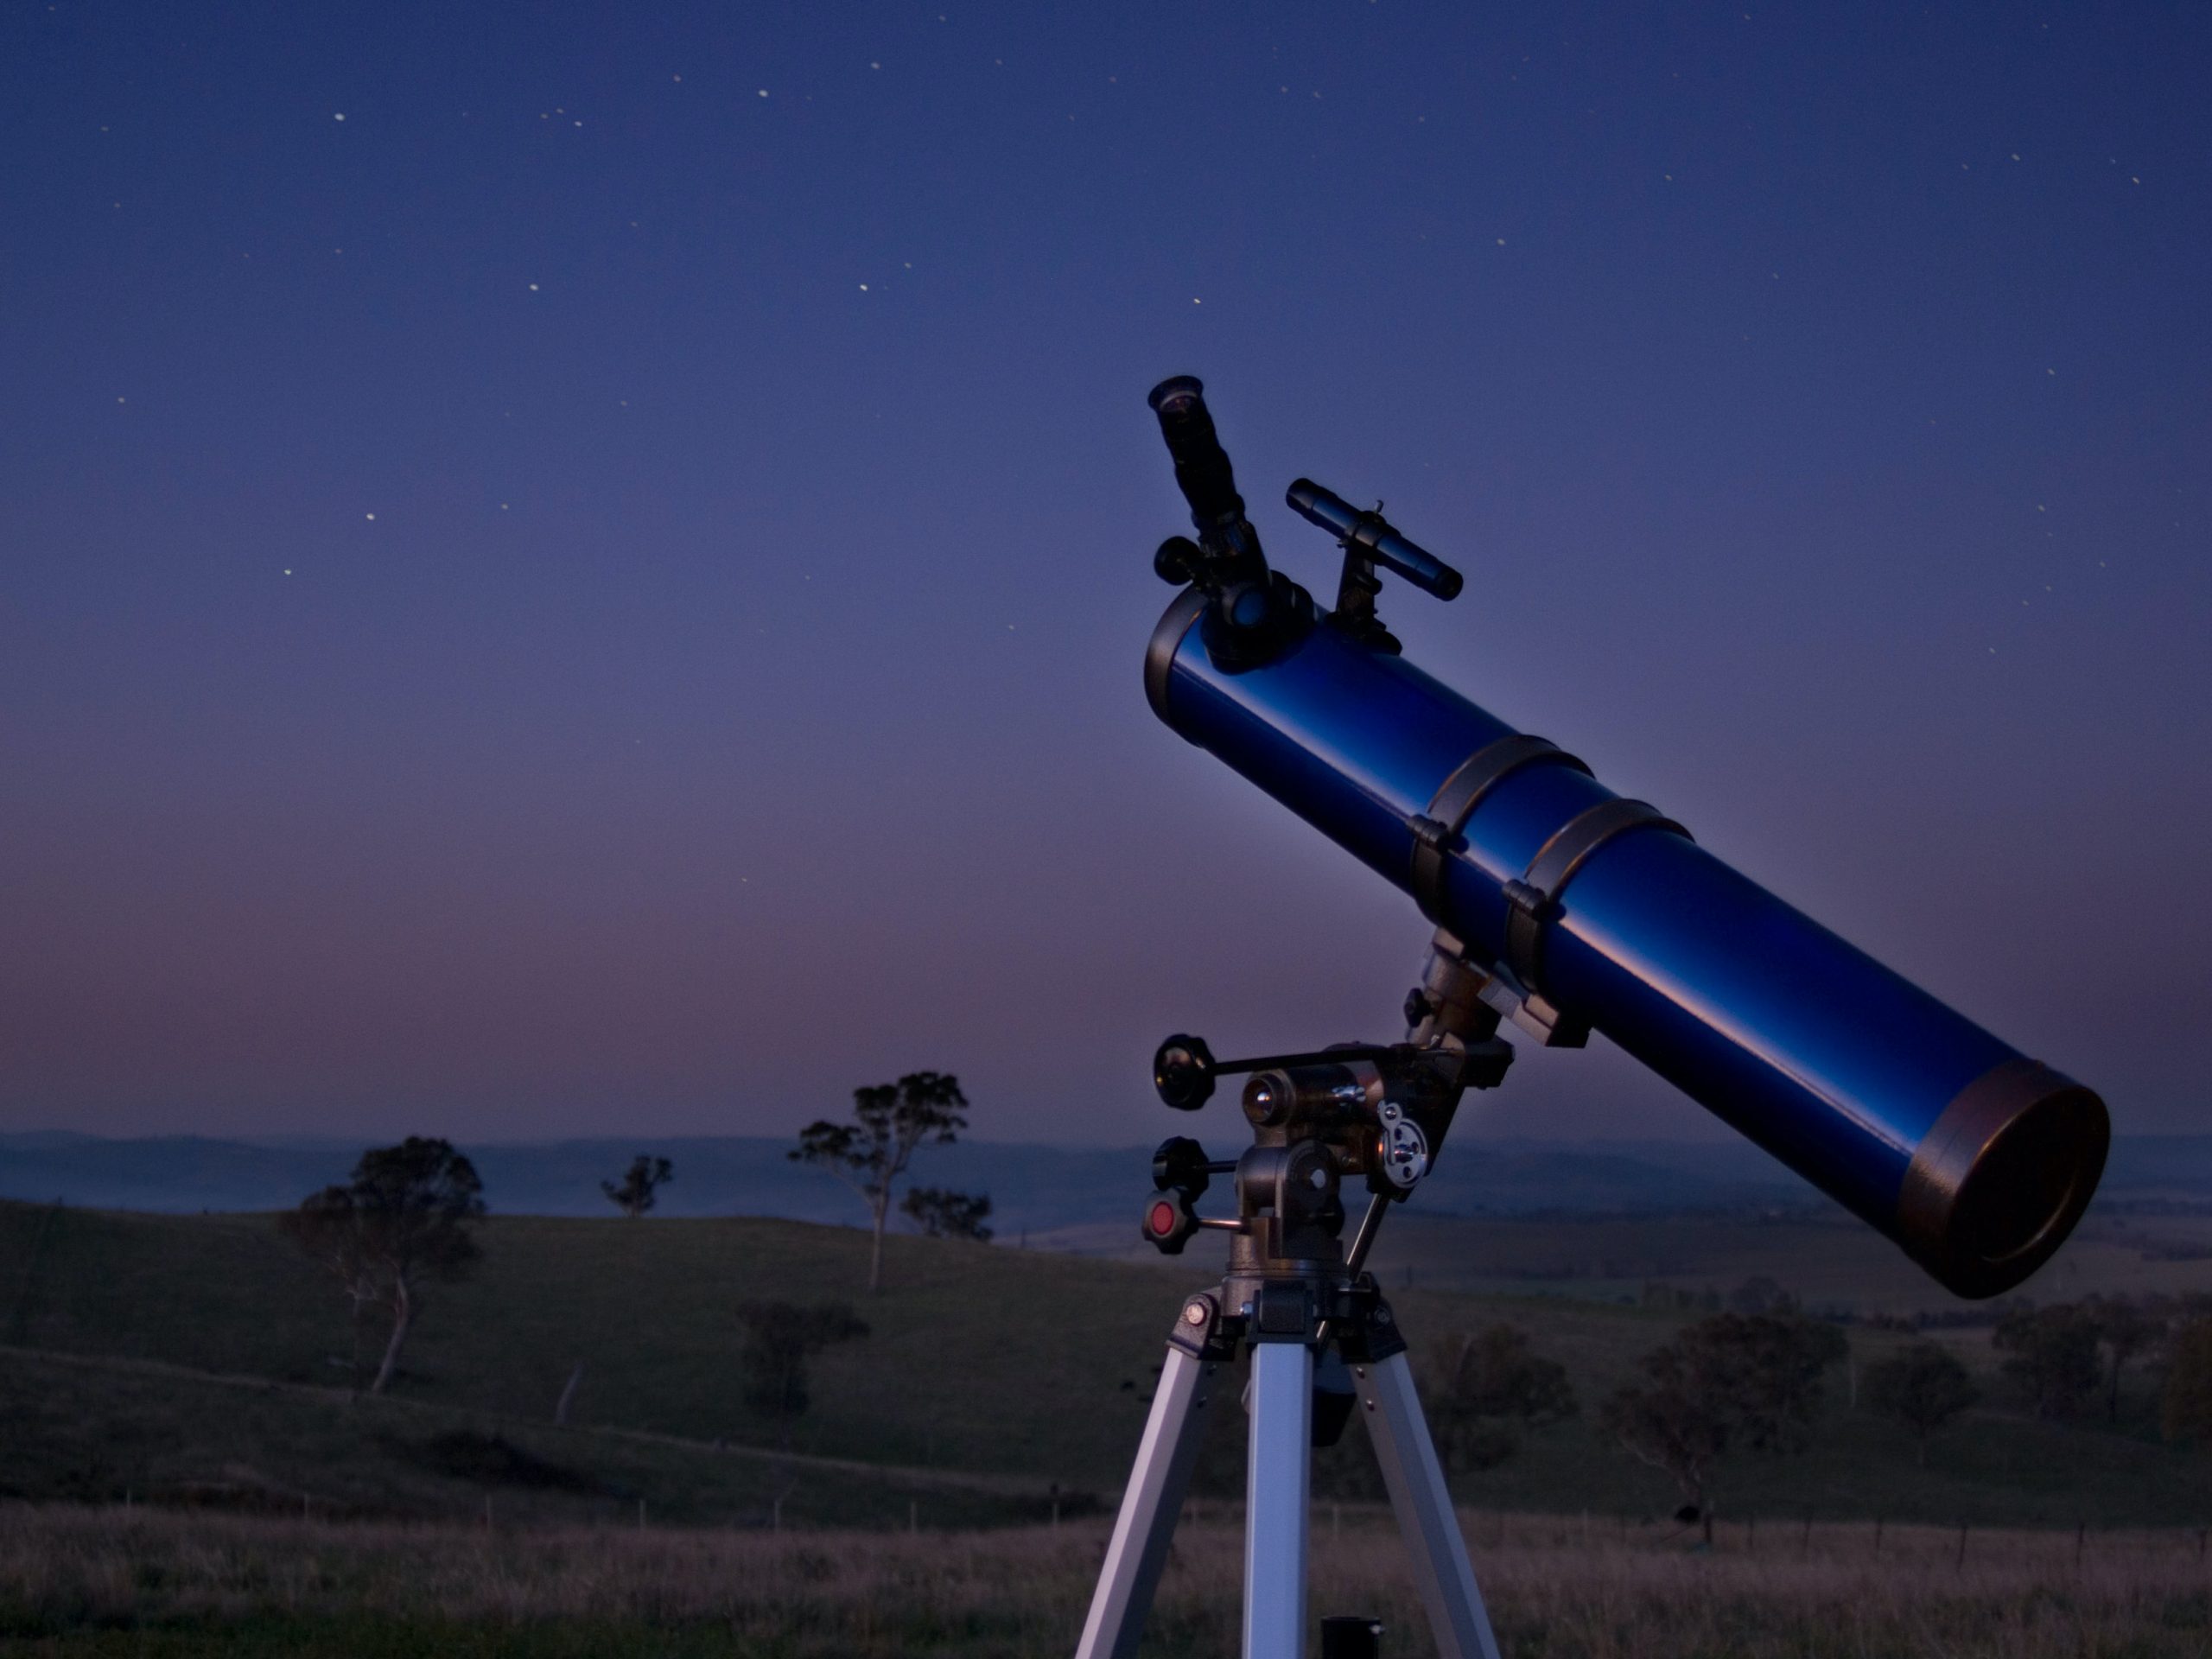 How to Choose a Telescope